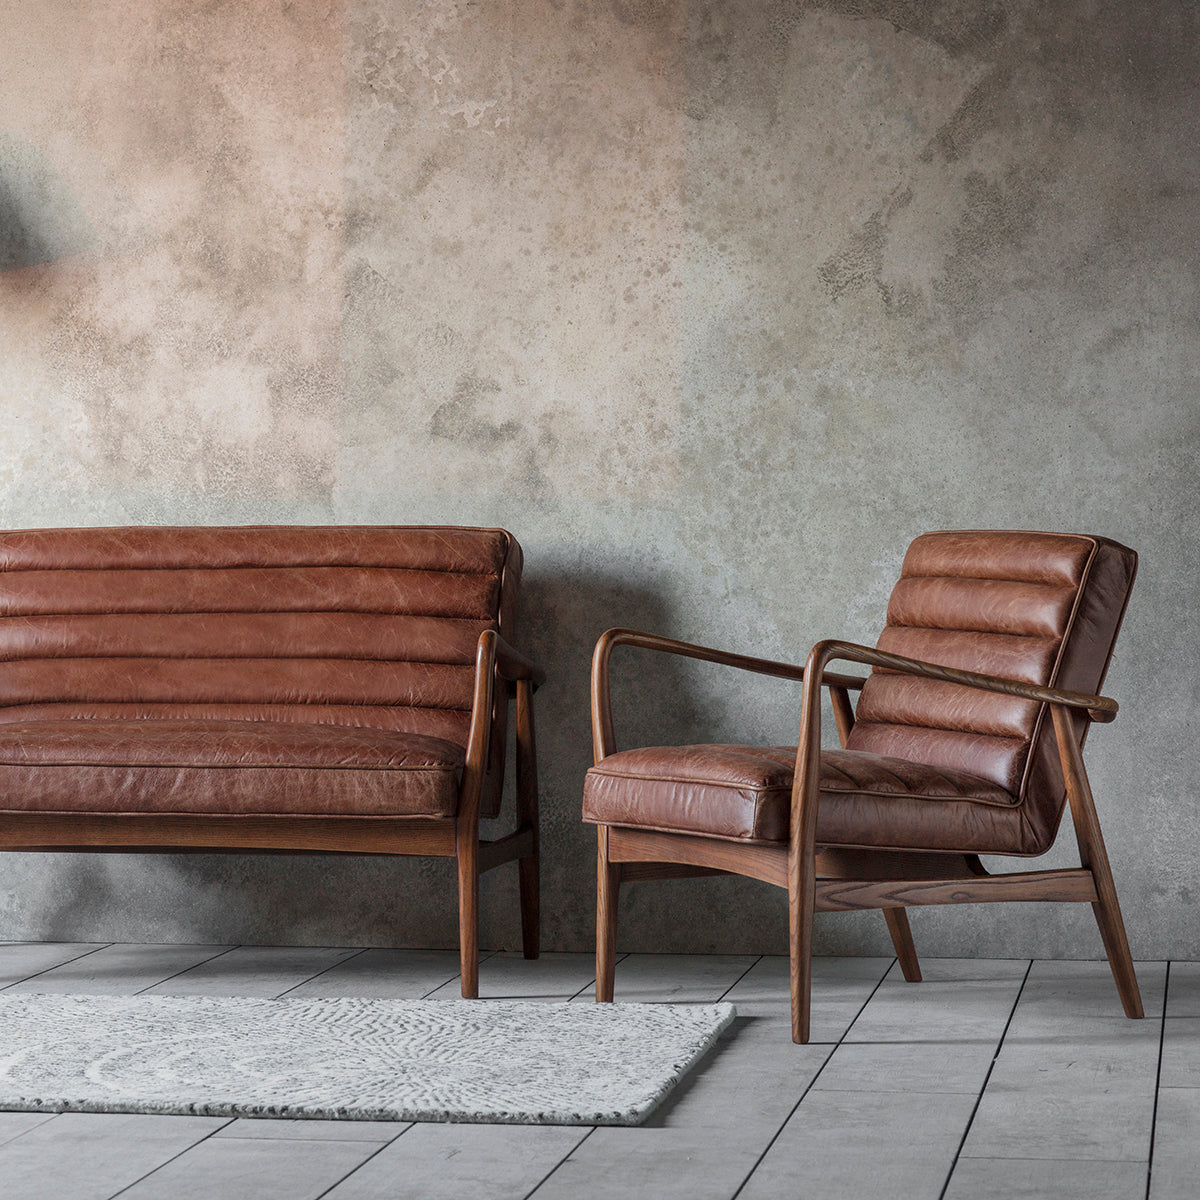 A pair of vintage brown leather armchairs from Kikiathome.co.uk in front of a concrete wall, perfect for interior decor.